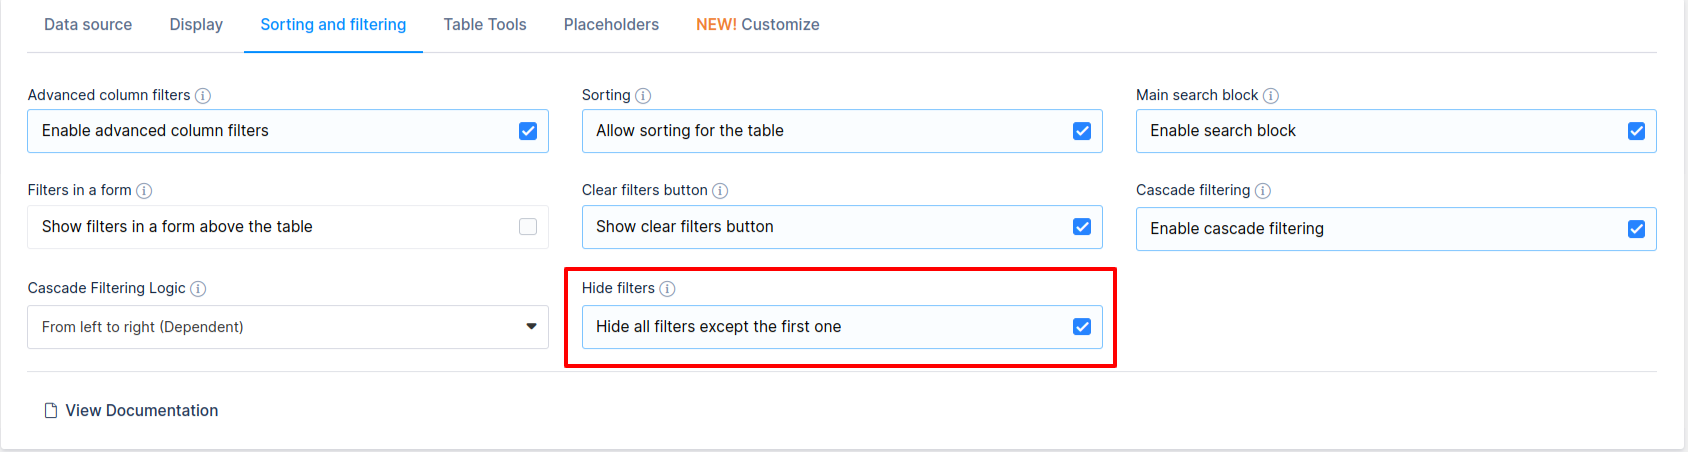 Hide filters except first one